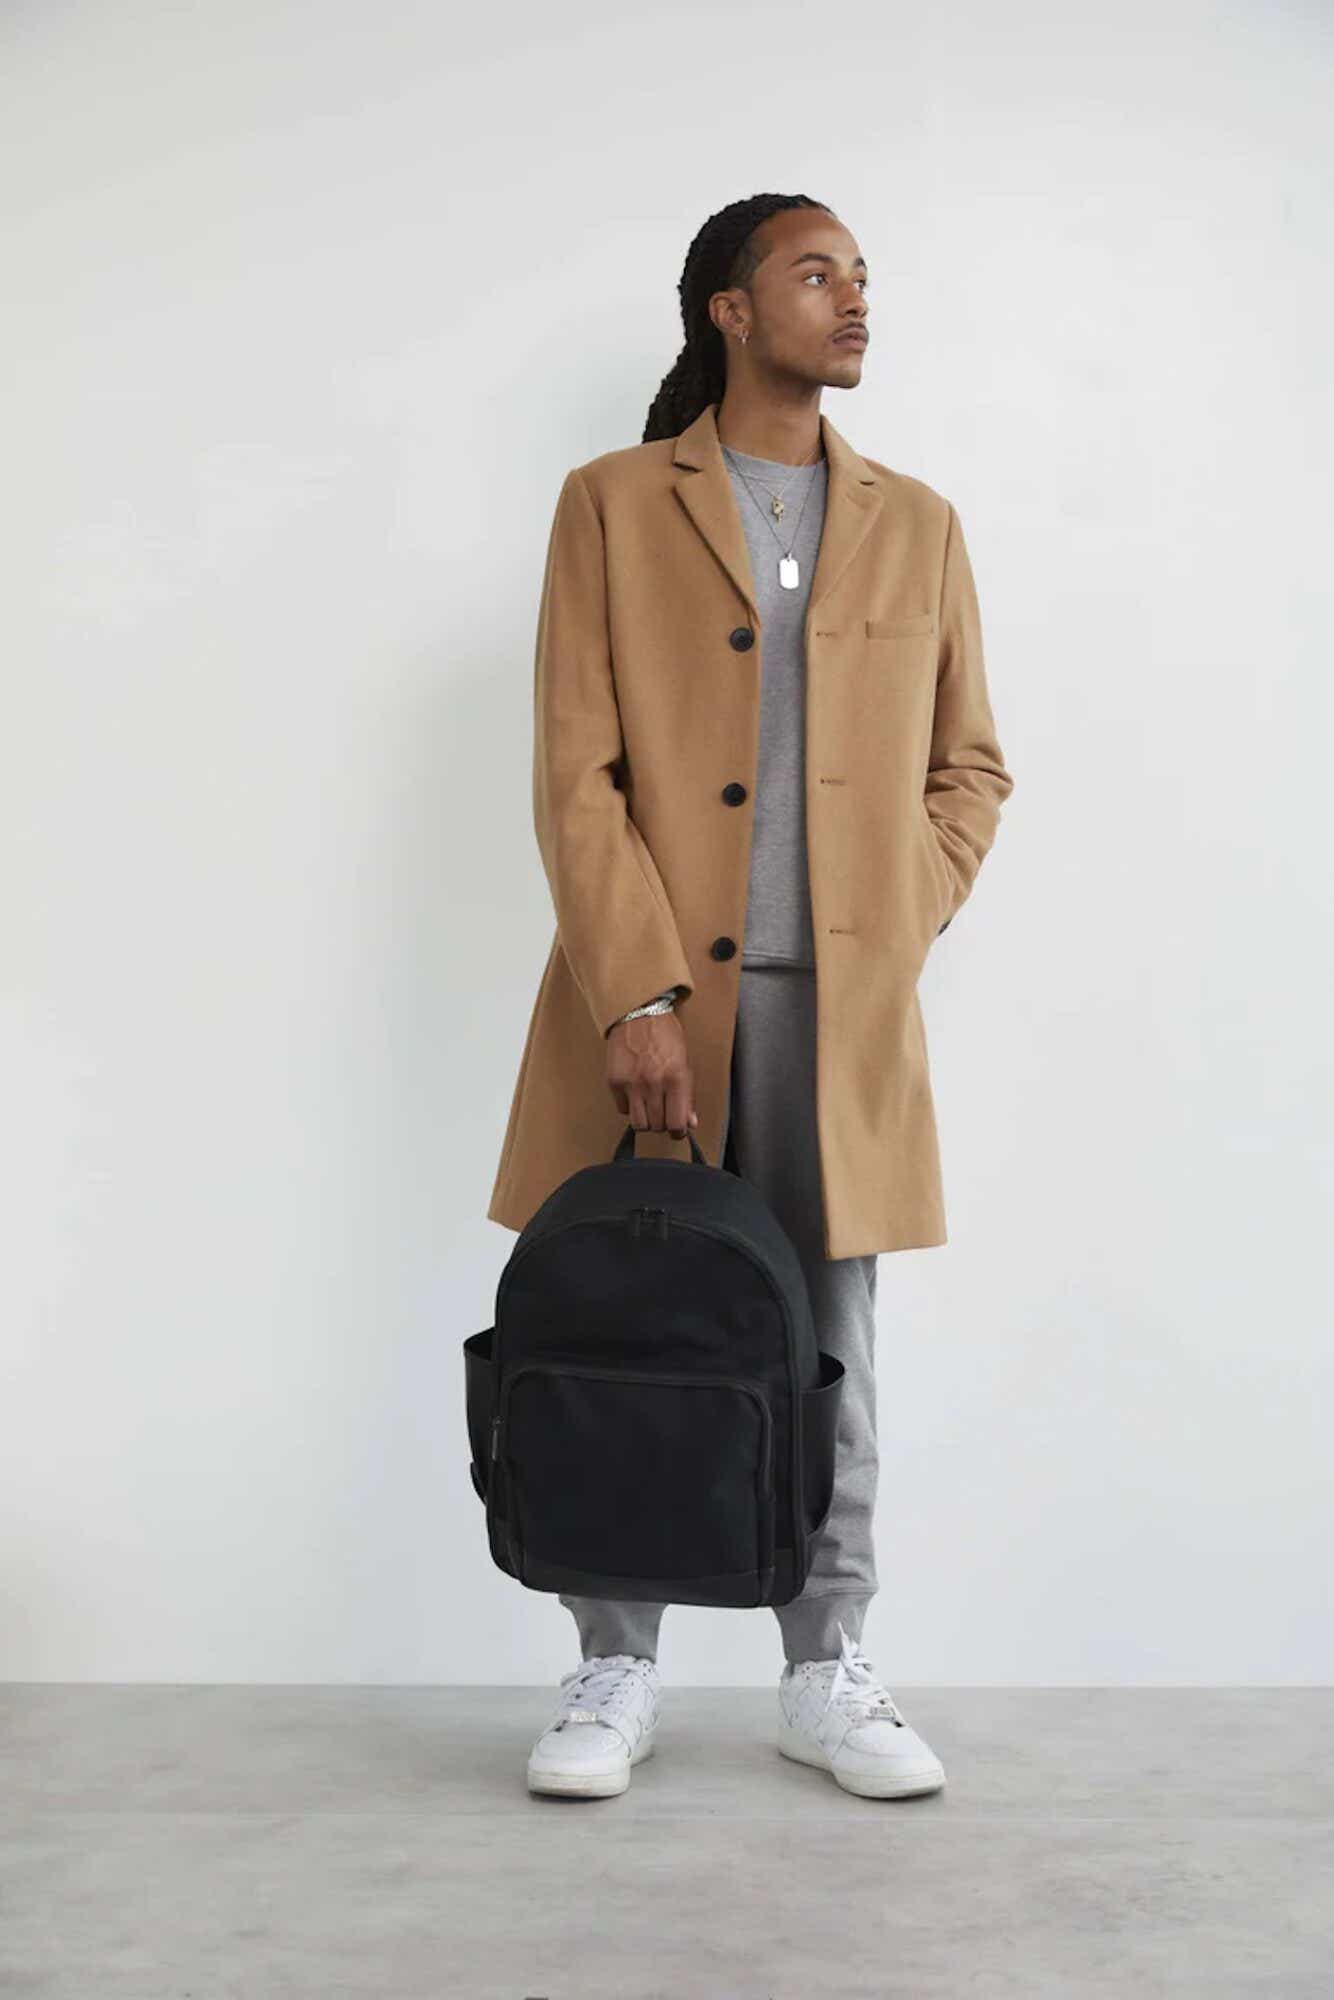 A person wearing a trench coat is holding a minimalistic black backpack.